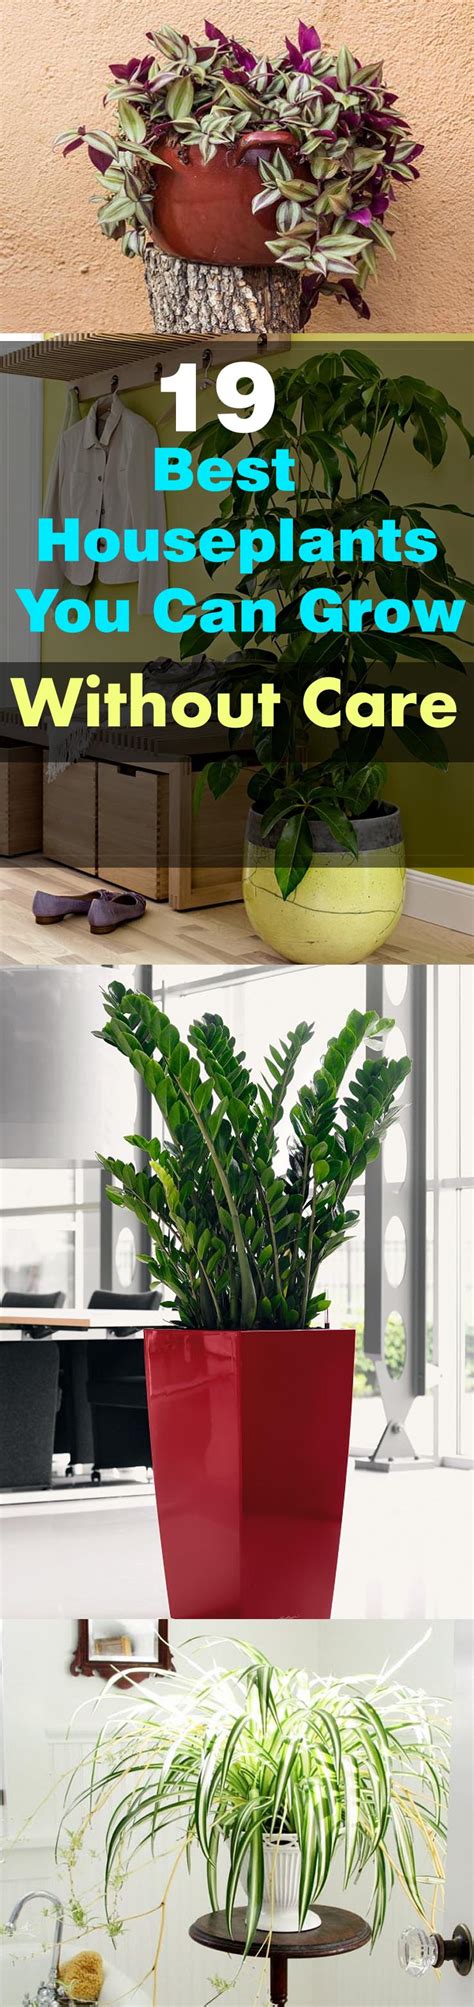 19 Easiest Houseplants You Can Grow Without Care Balcony Garden Web